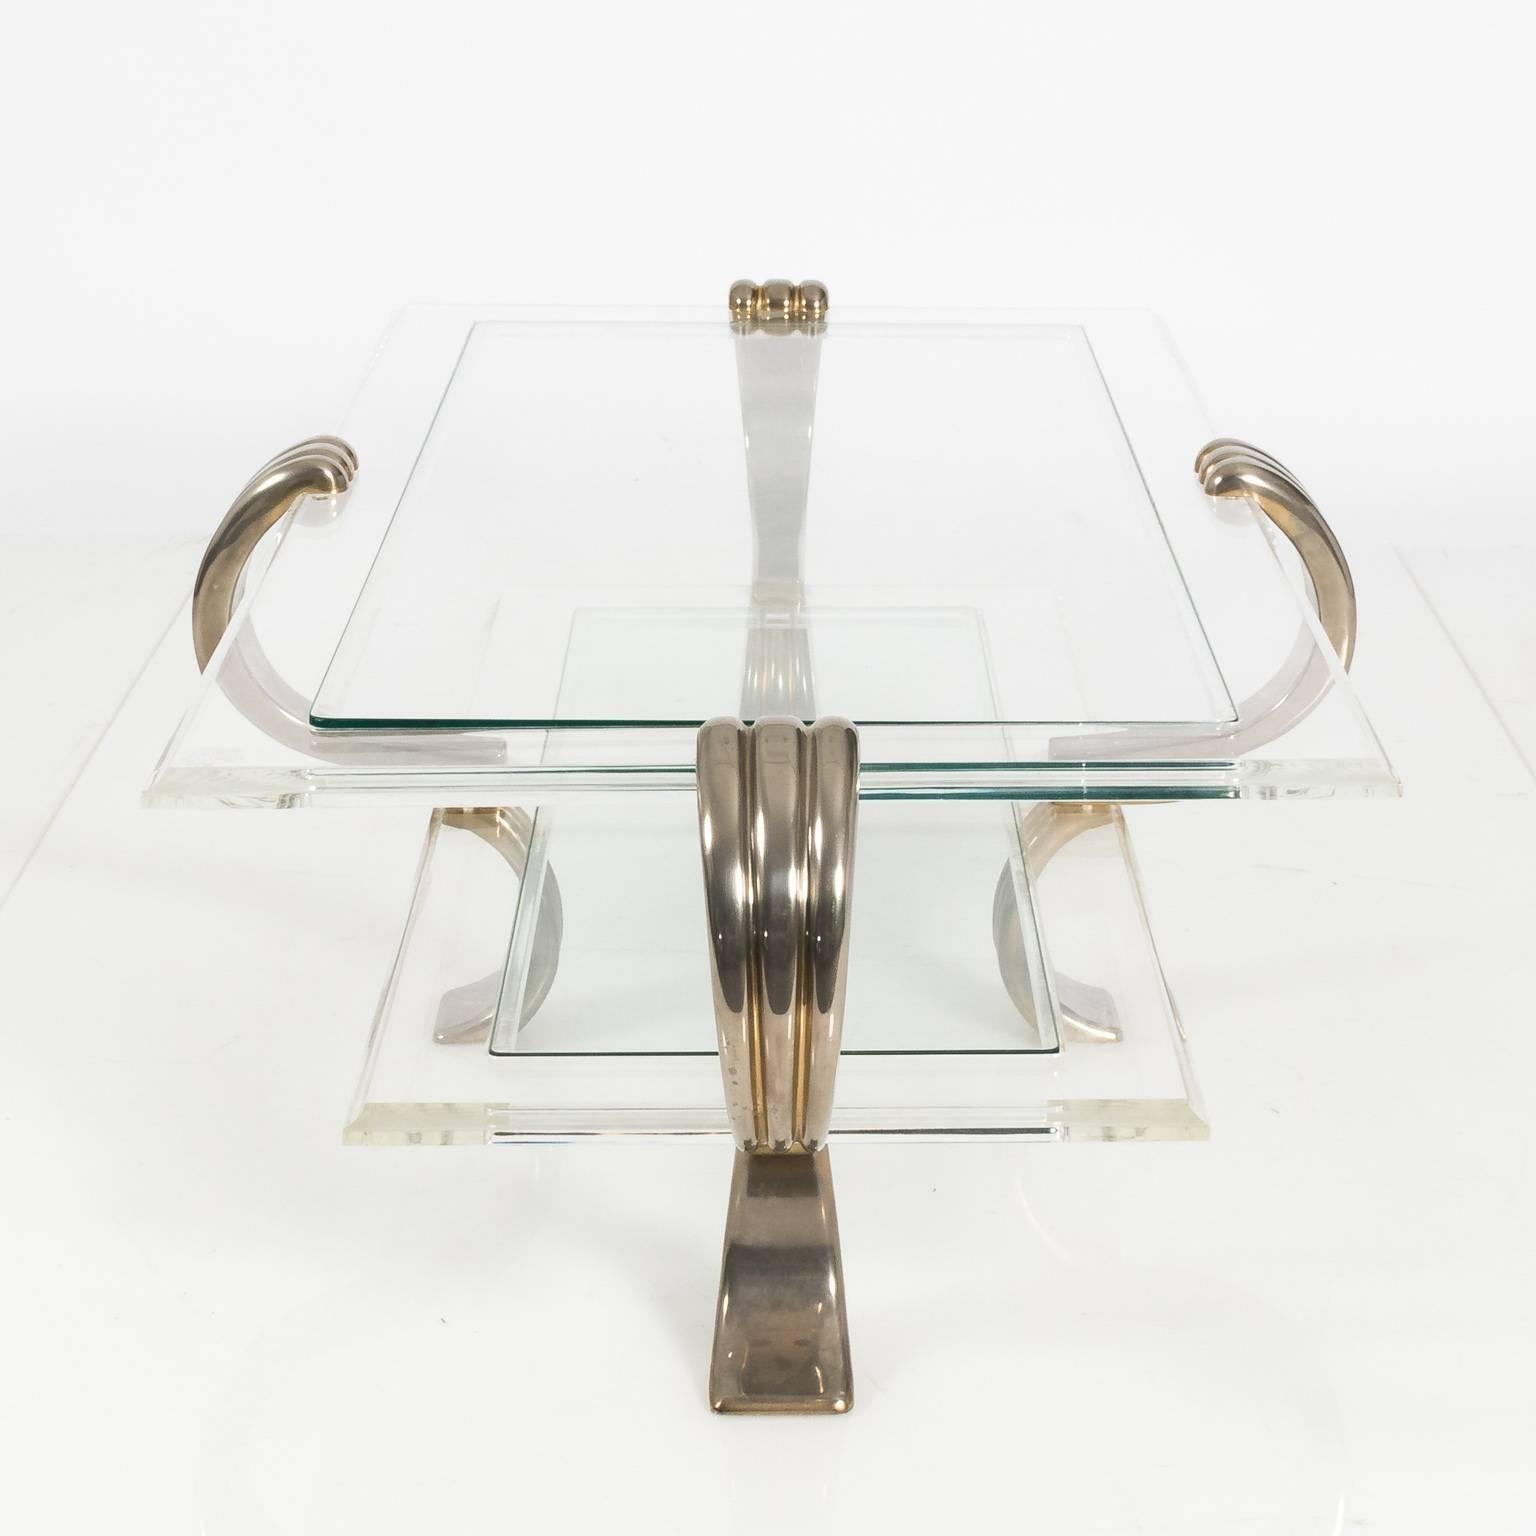 Contemporary Lucite coffee table with chrome-plated, brass mounted bracket legs with a lower shelf.